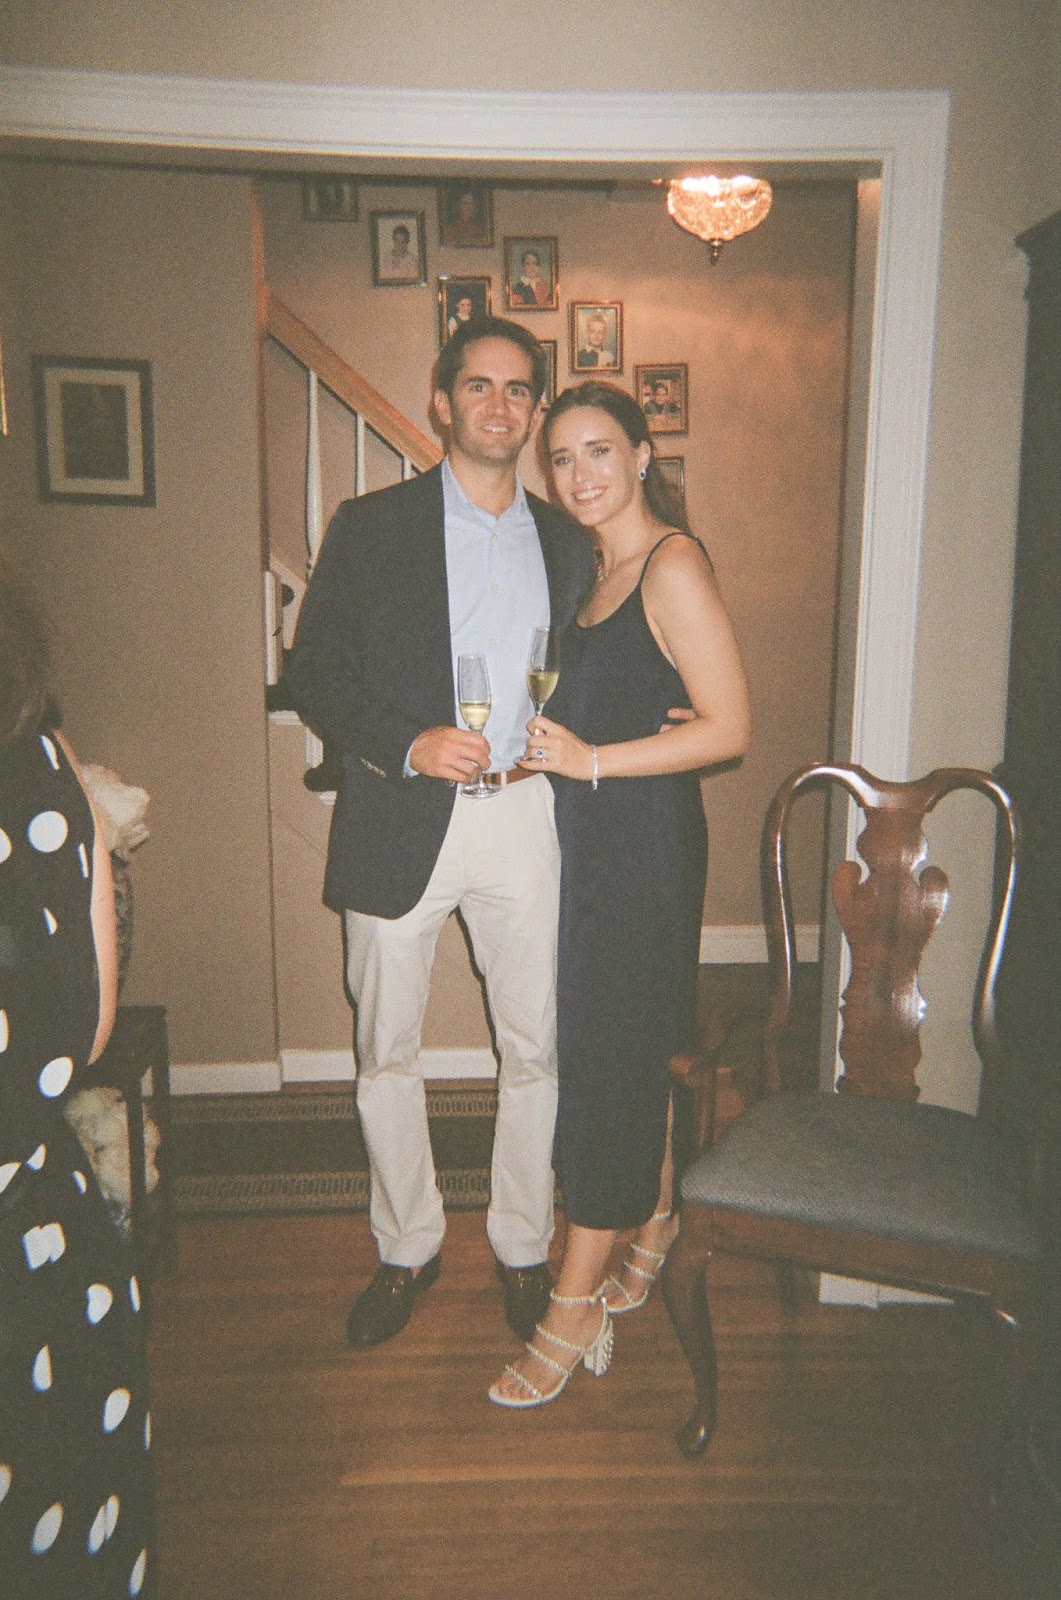 The Disposable Camera Film From Our Wedding New York City Fashion And Lifestyle Blog Covering The Bases